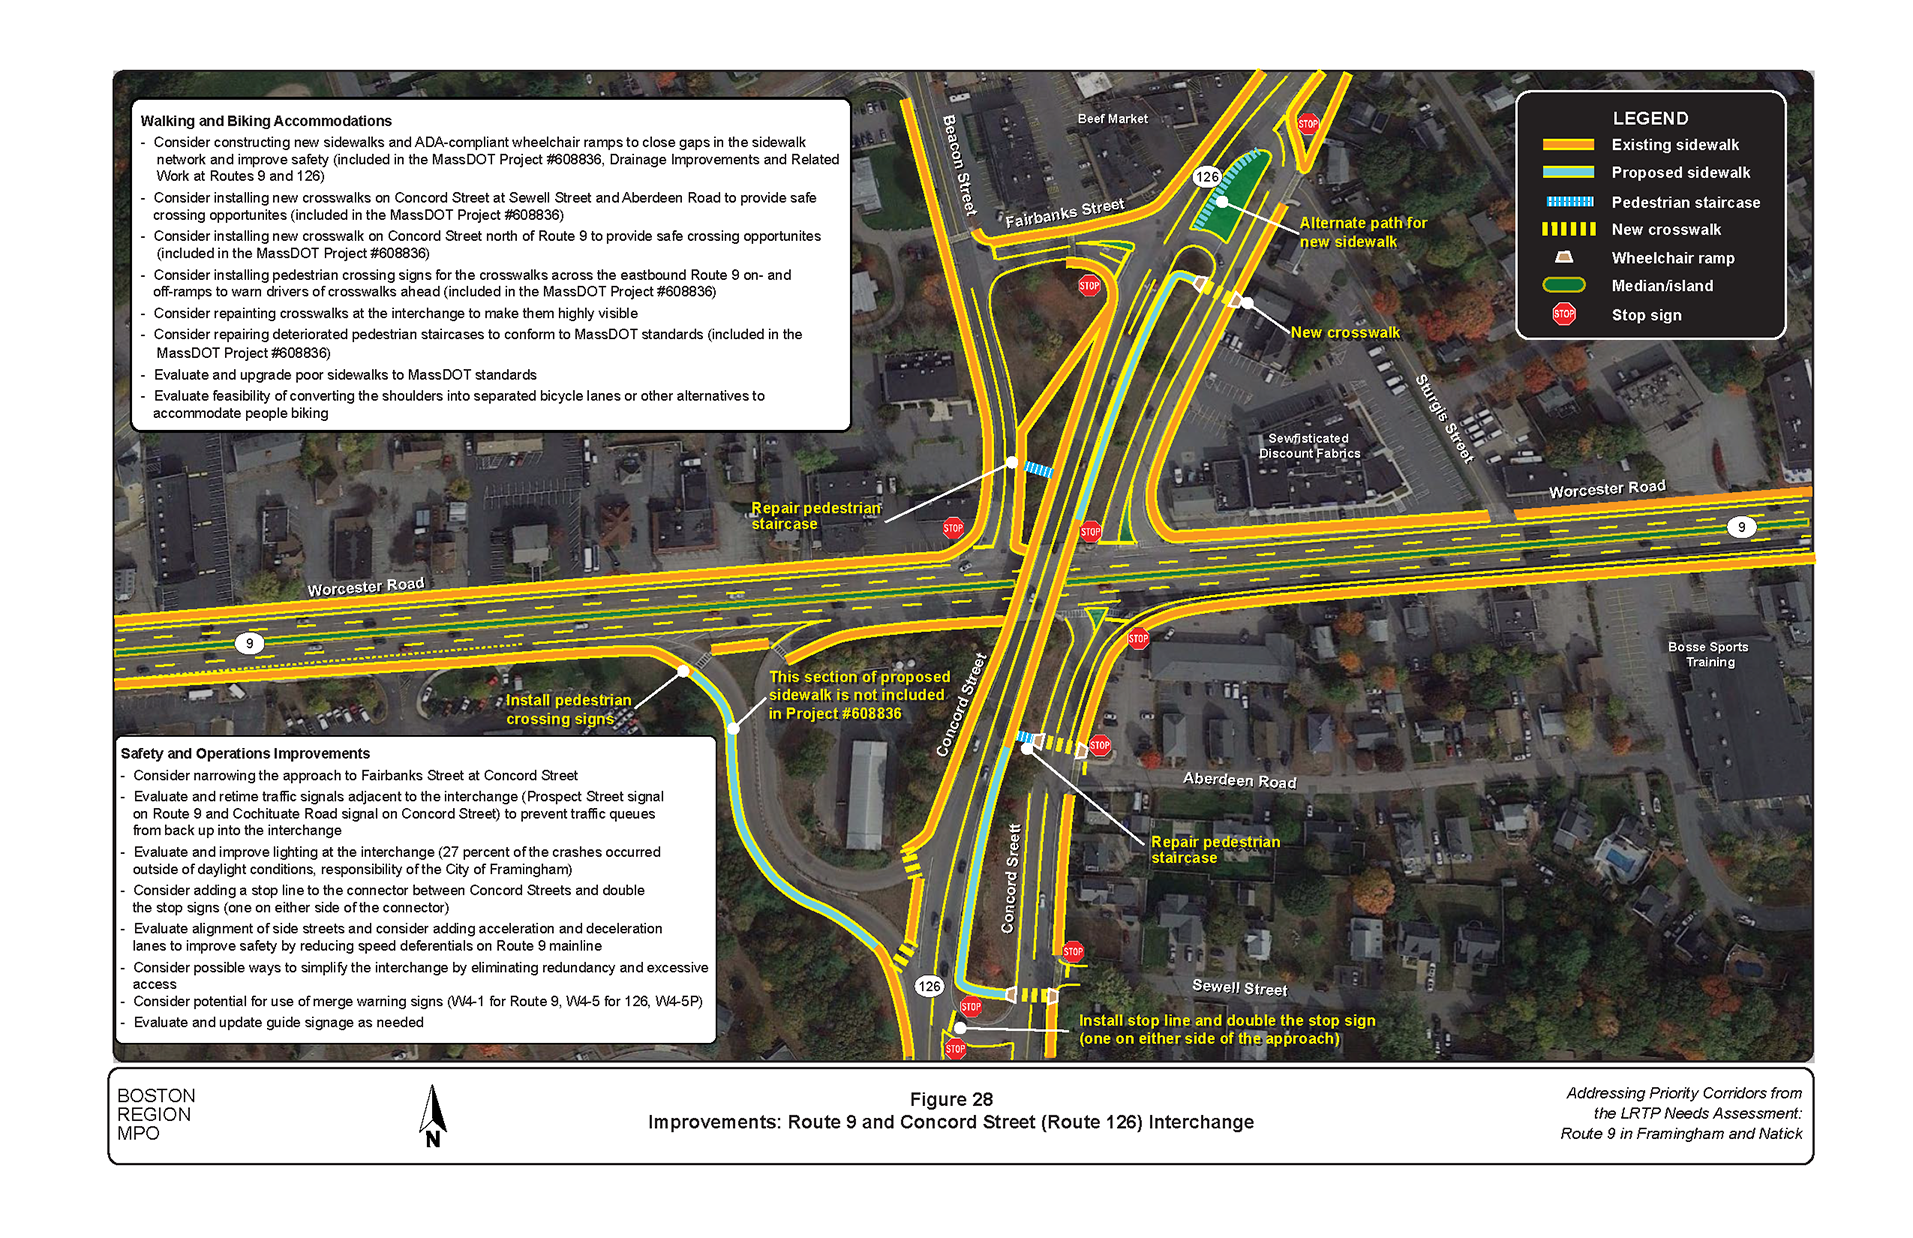 Figure 28 is an aerial photo showing the interchange of Route 9 and Concord Street (Route 126) and the improvements